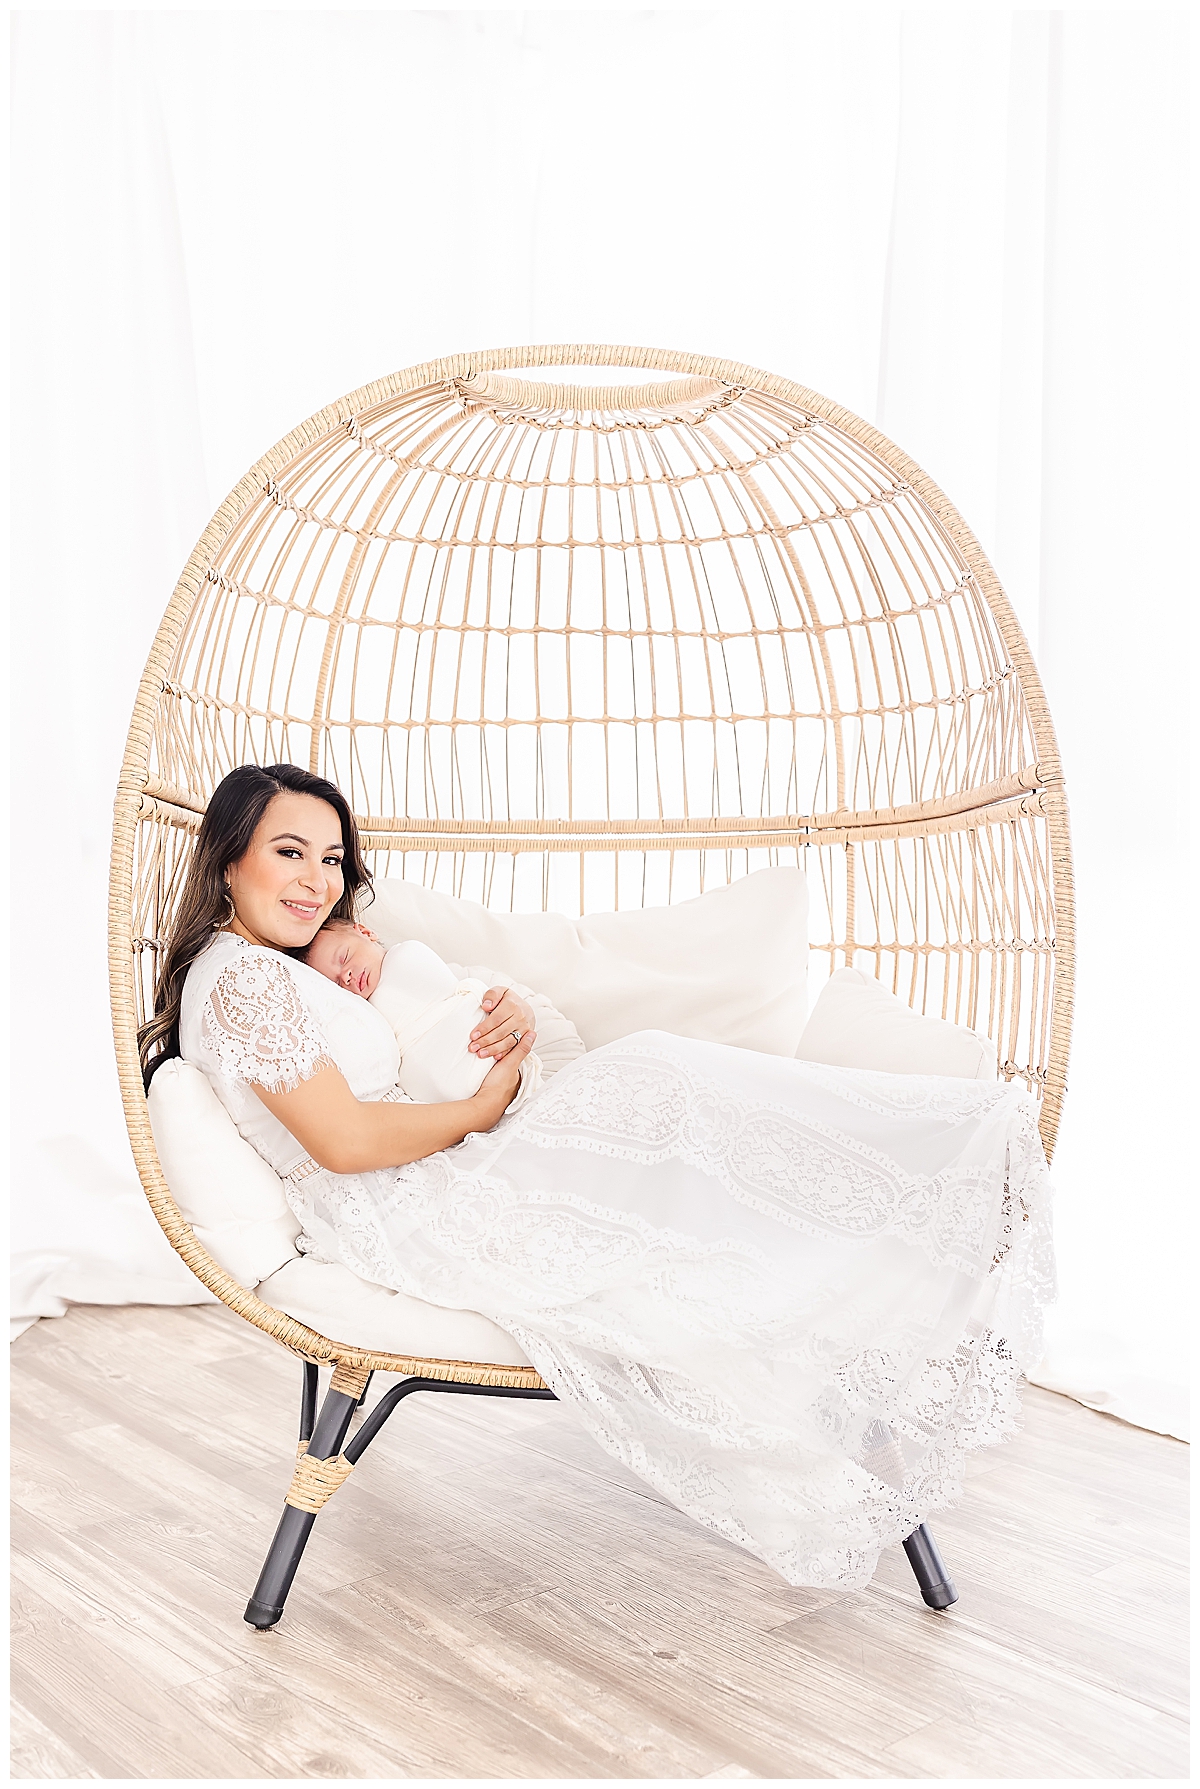 Newborn held by mom in white lace dress in whicker chair